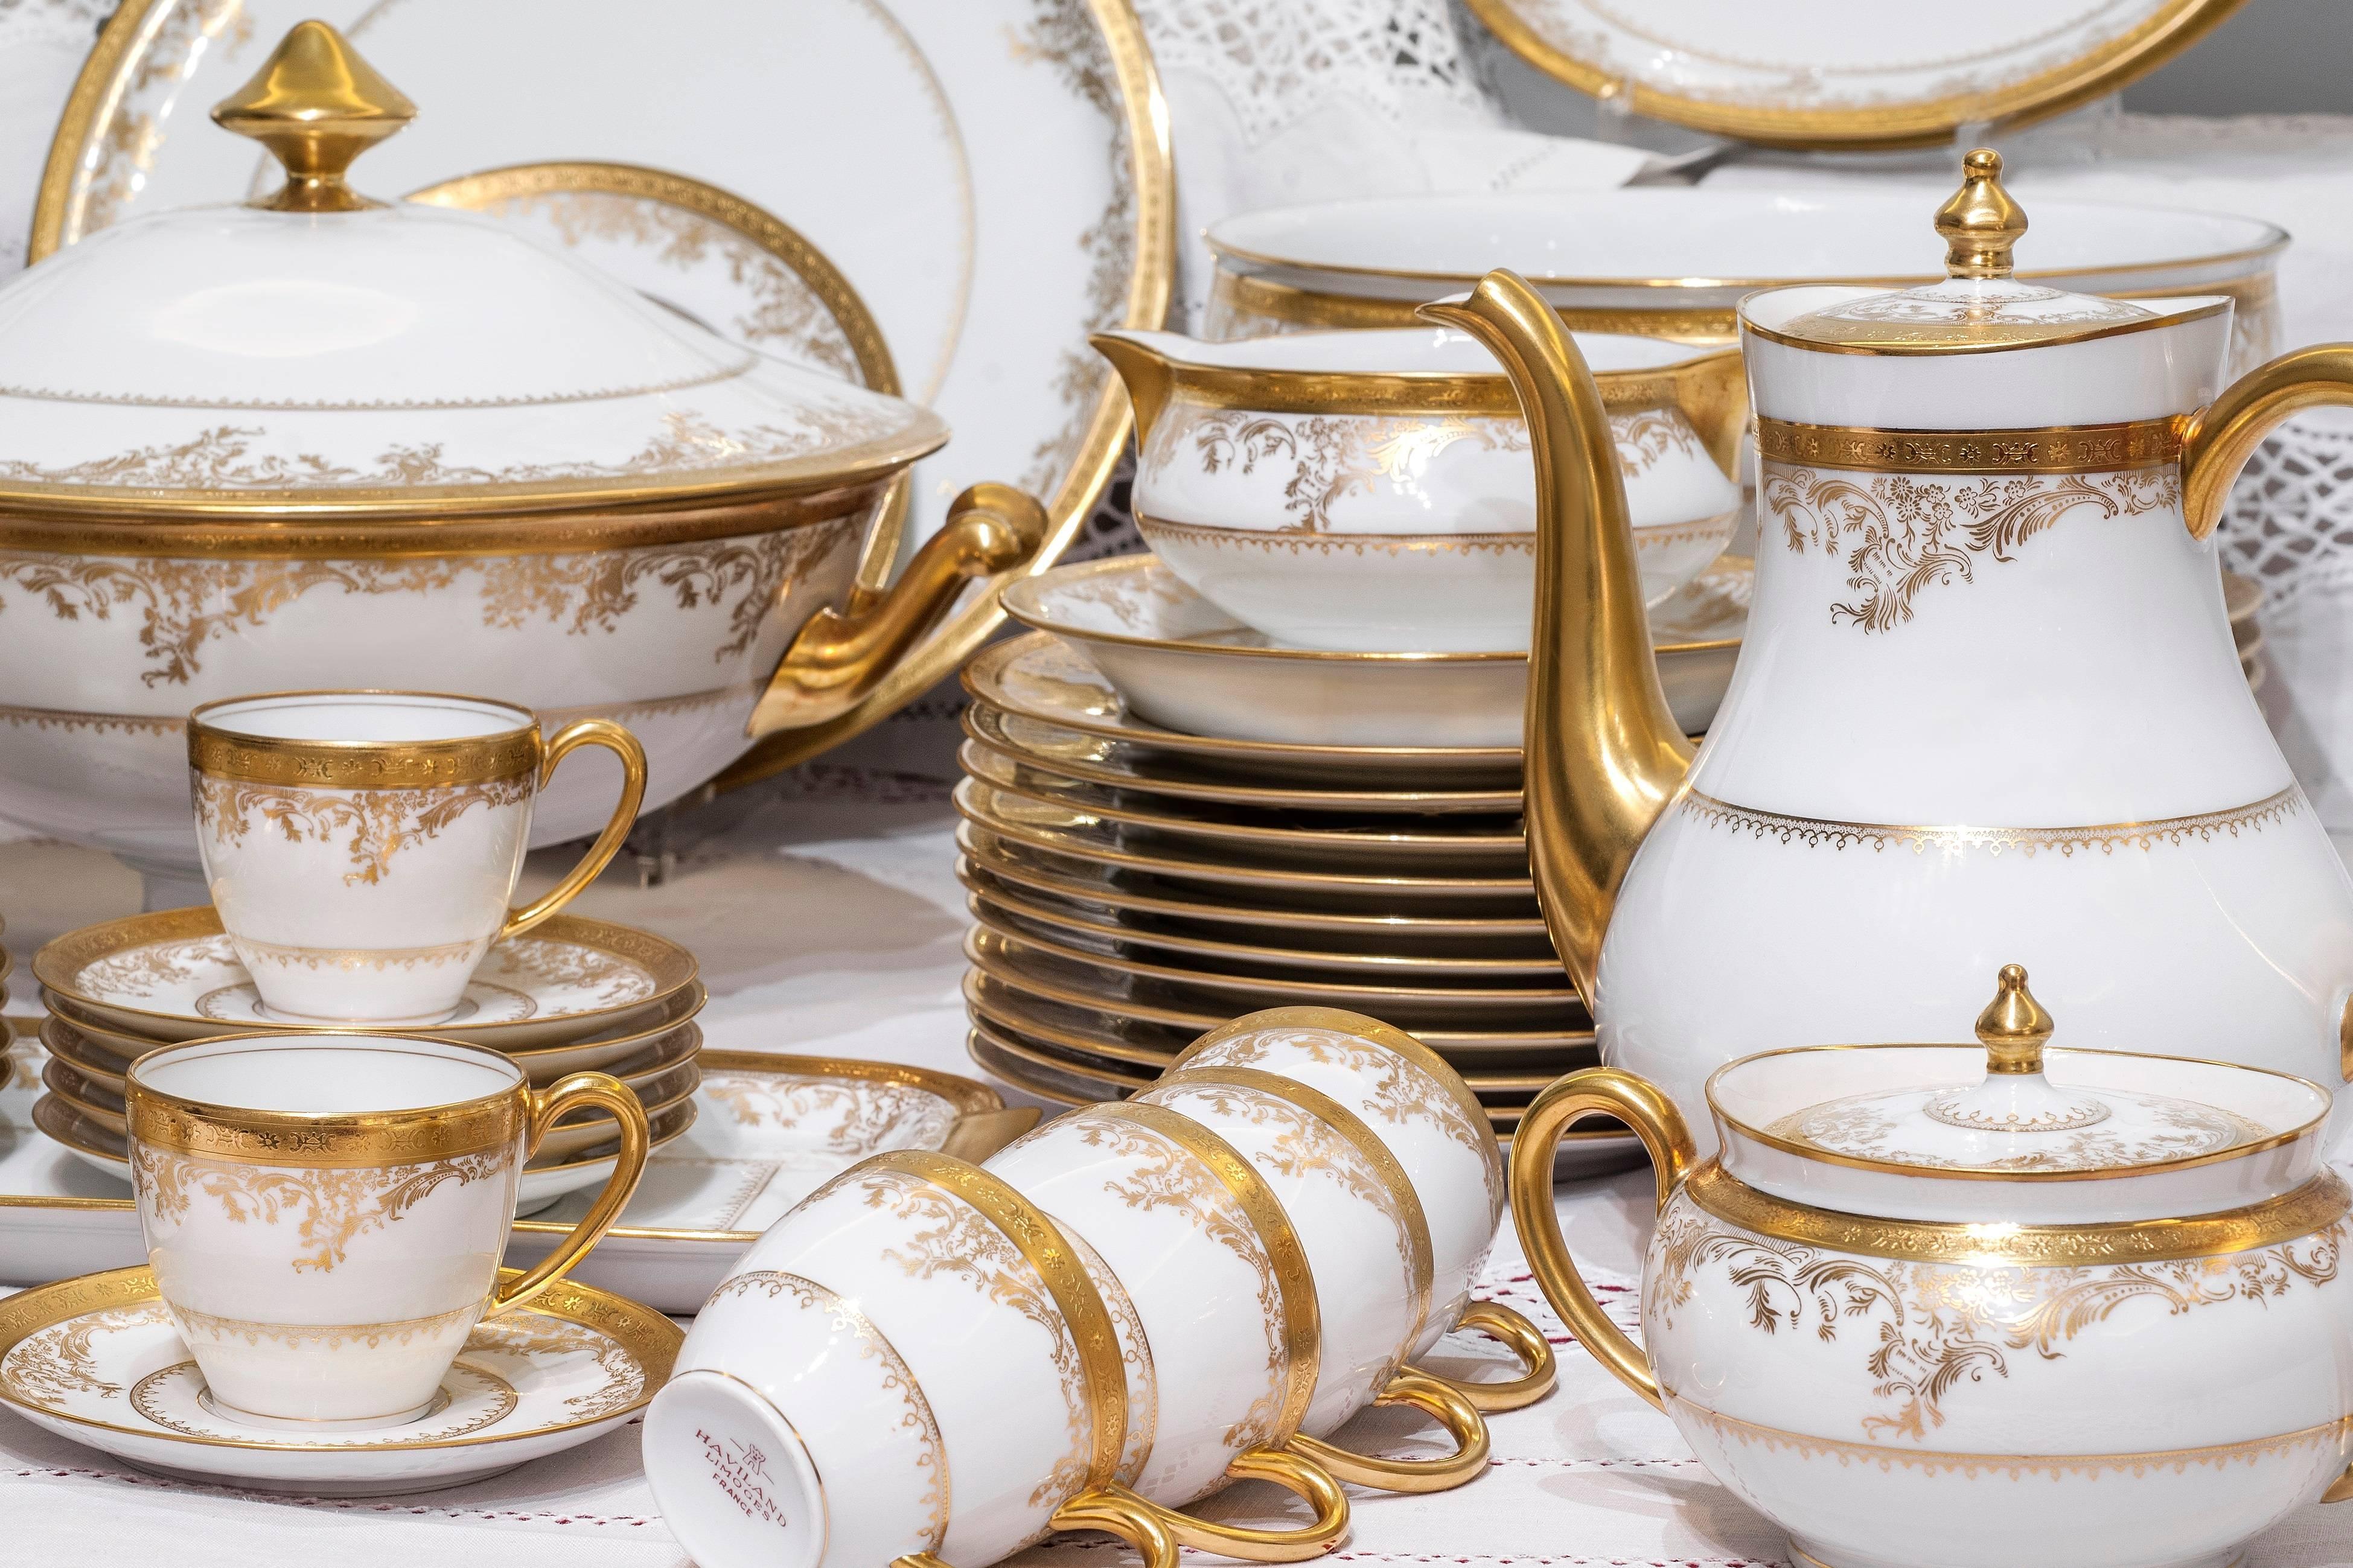 A very elegant 86 pieces French Limoges table service completed with its coffee service in top conditions for 12 people with additional pieces.
White brilliant porcelain and decorated with fine gold. 

24 plates 
12 soup plates
12 dessert